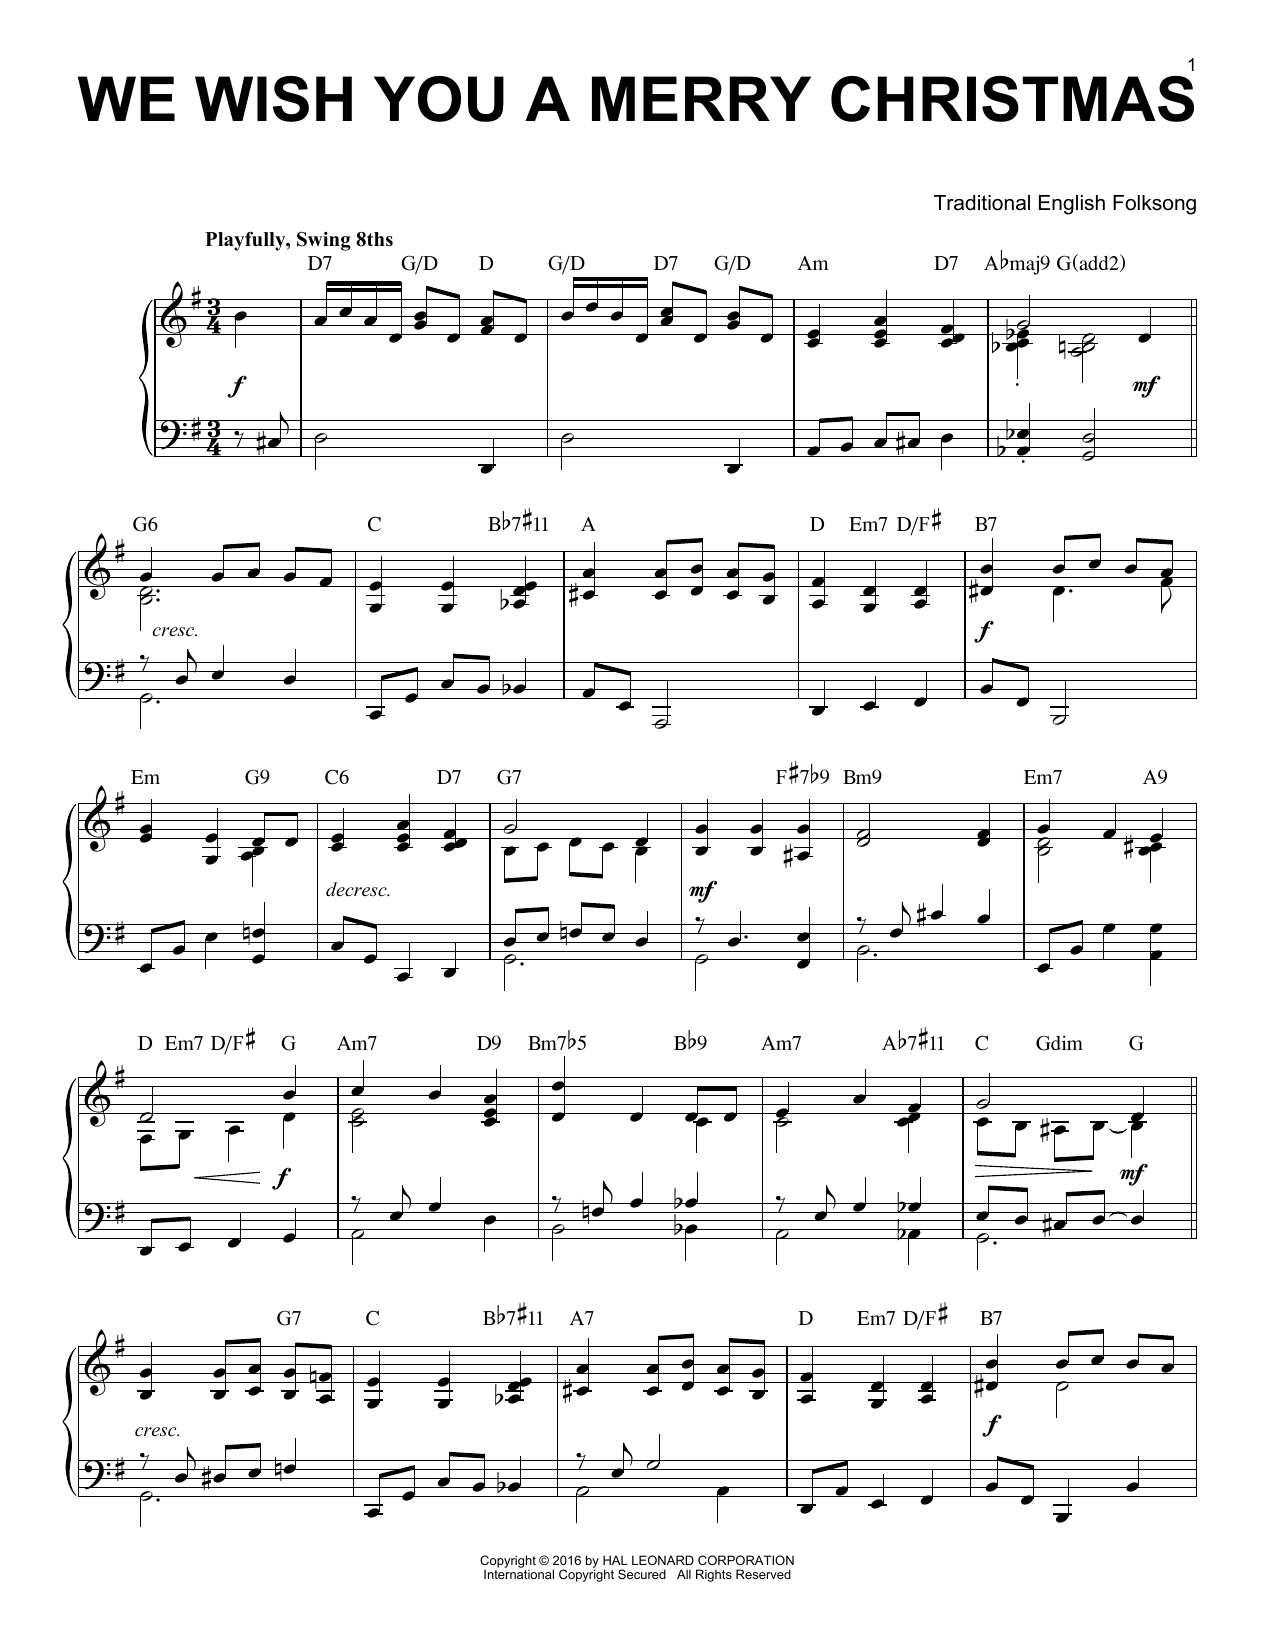 We Wish You A Merry Christmas Jazz Version Arr Brent Edstrom Sheet Music By Traditional 